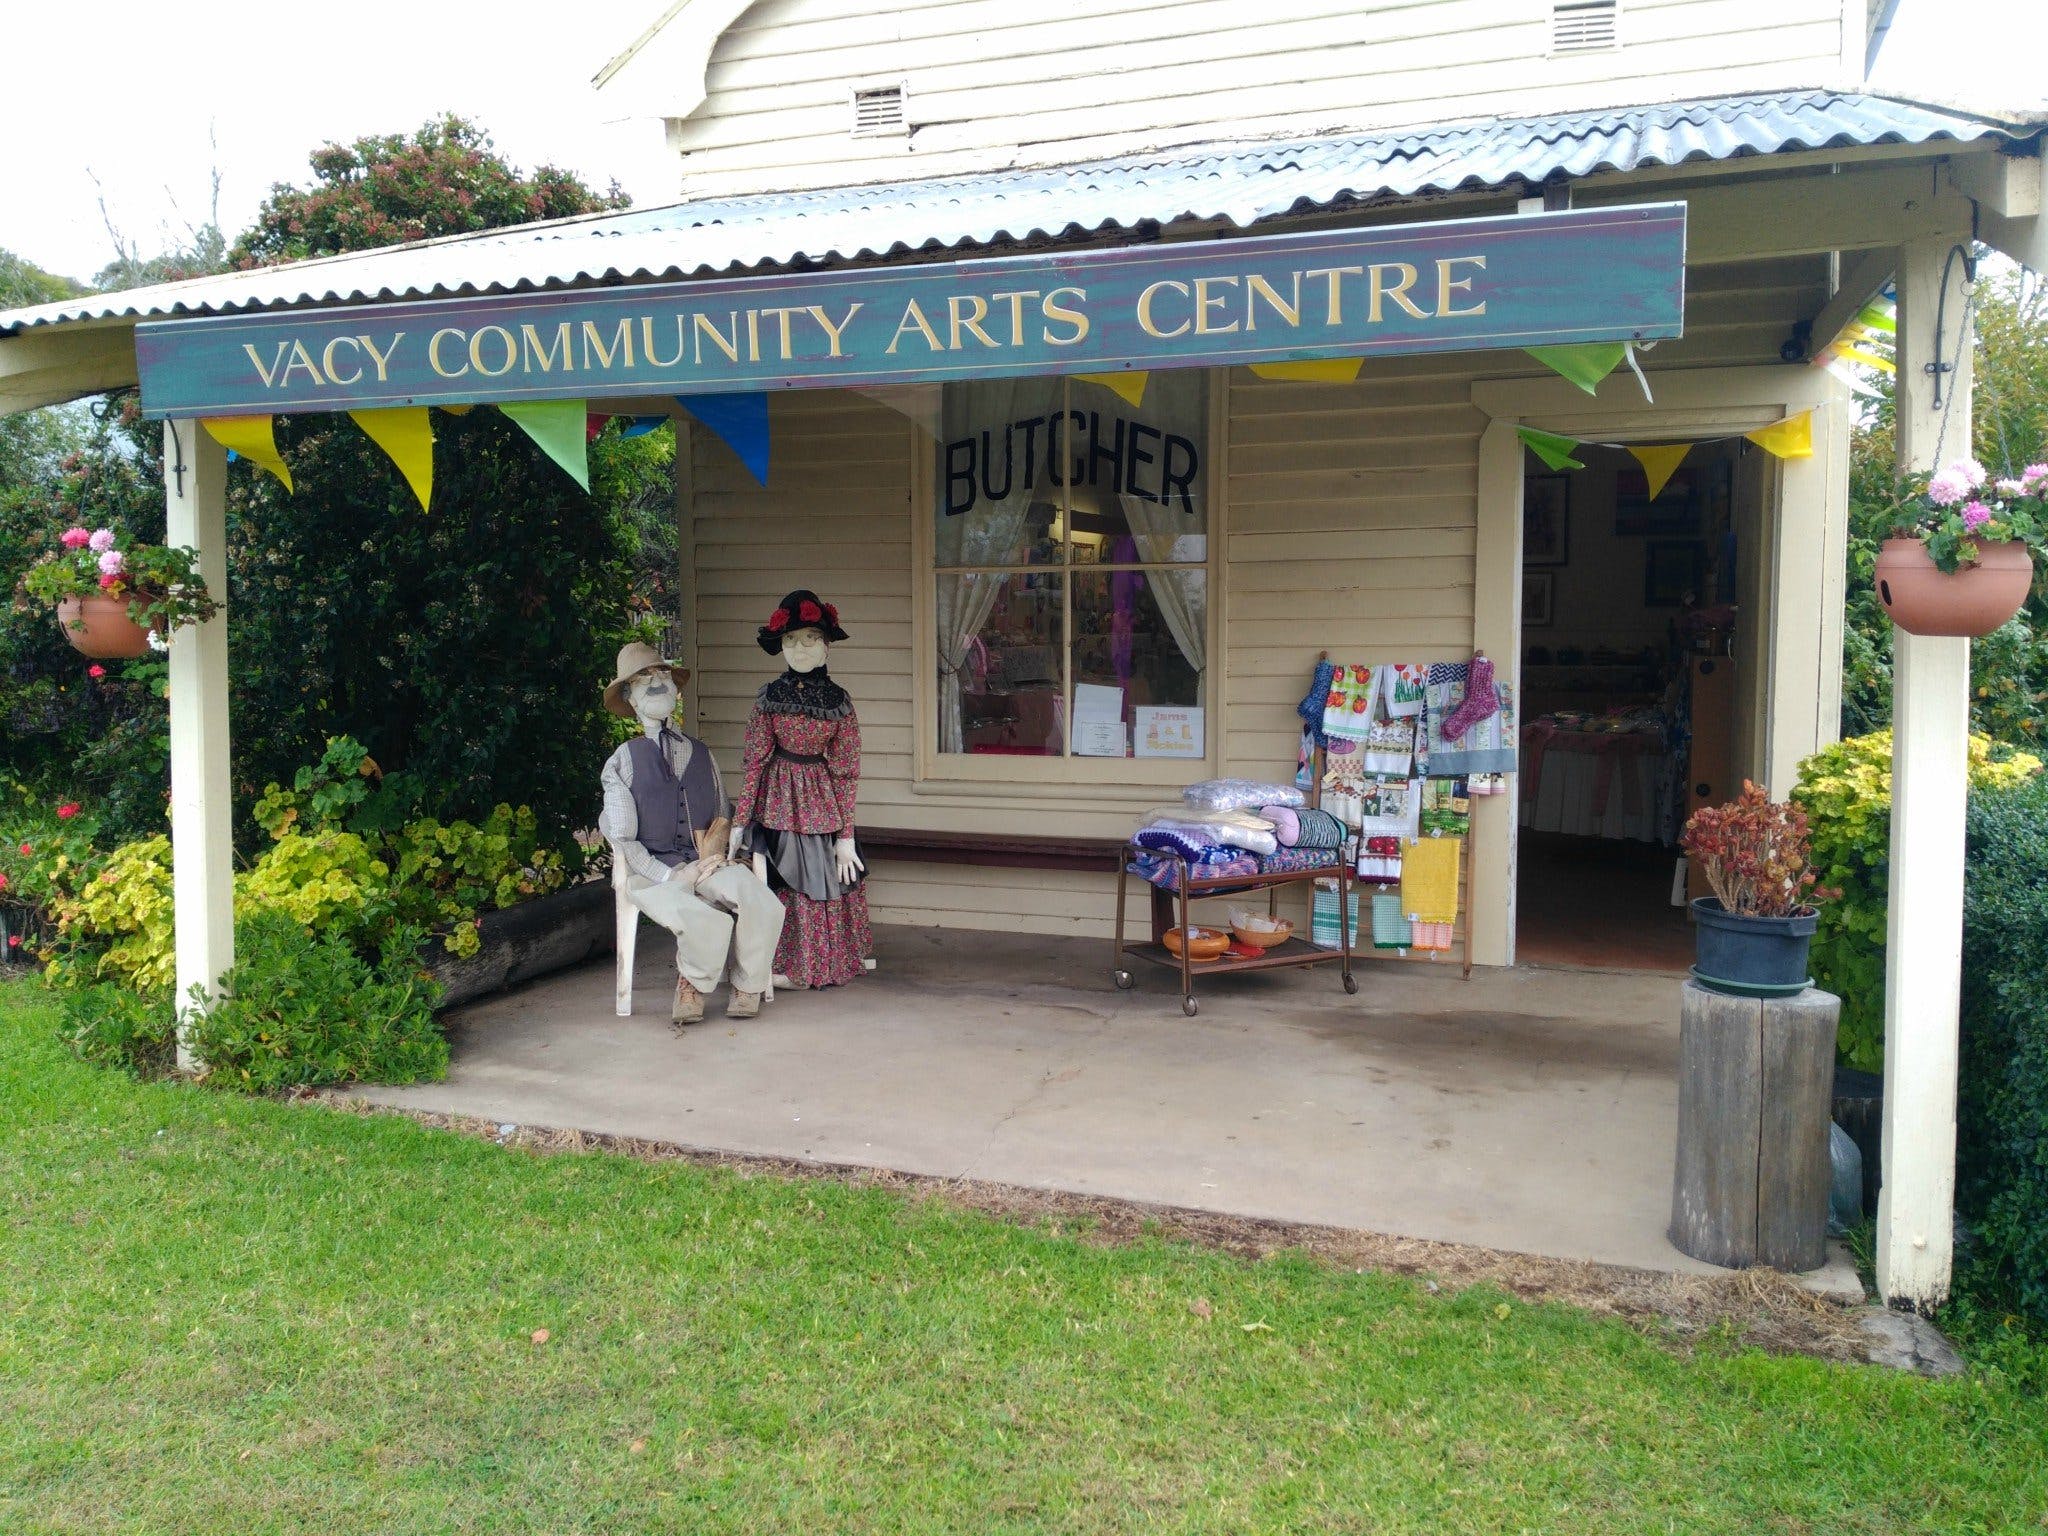 Vacy Community Arts Centre - Find Attractions